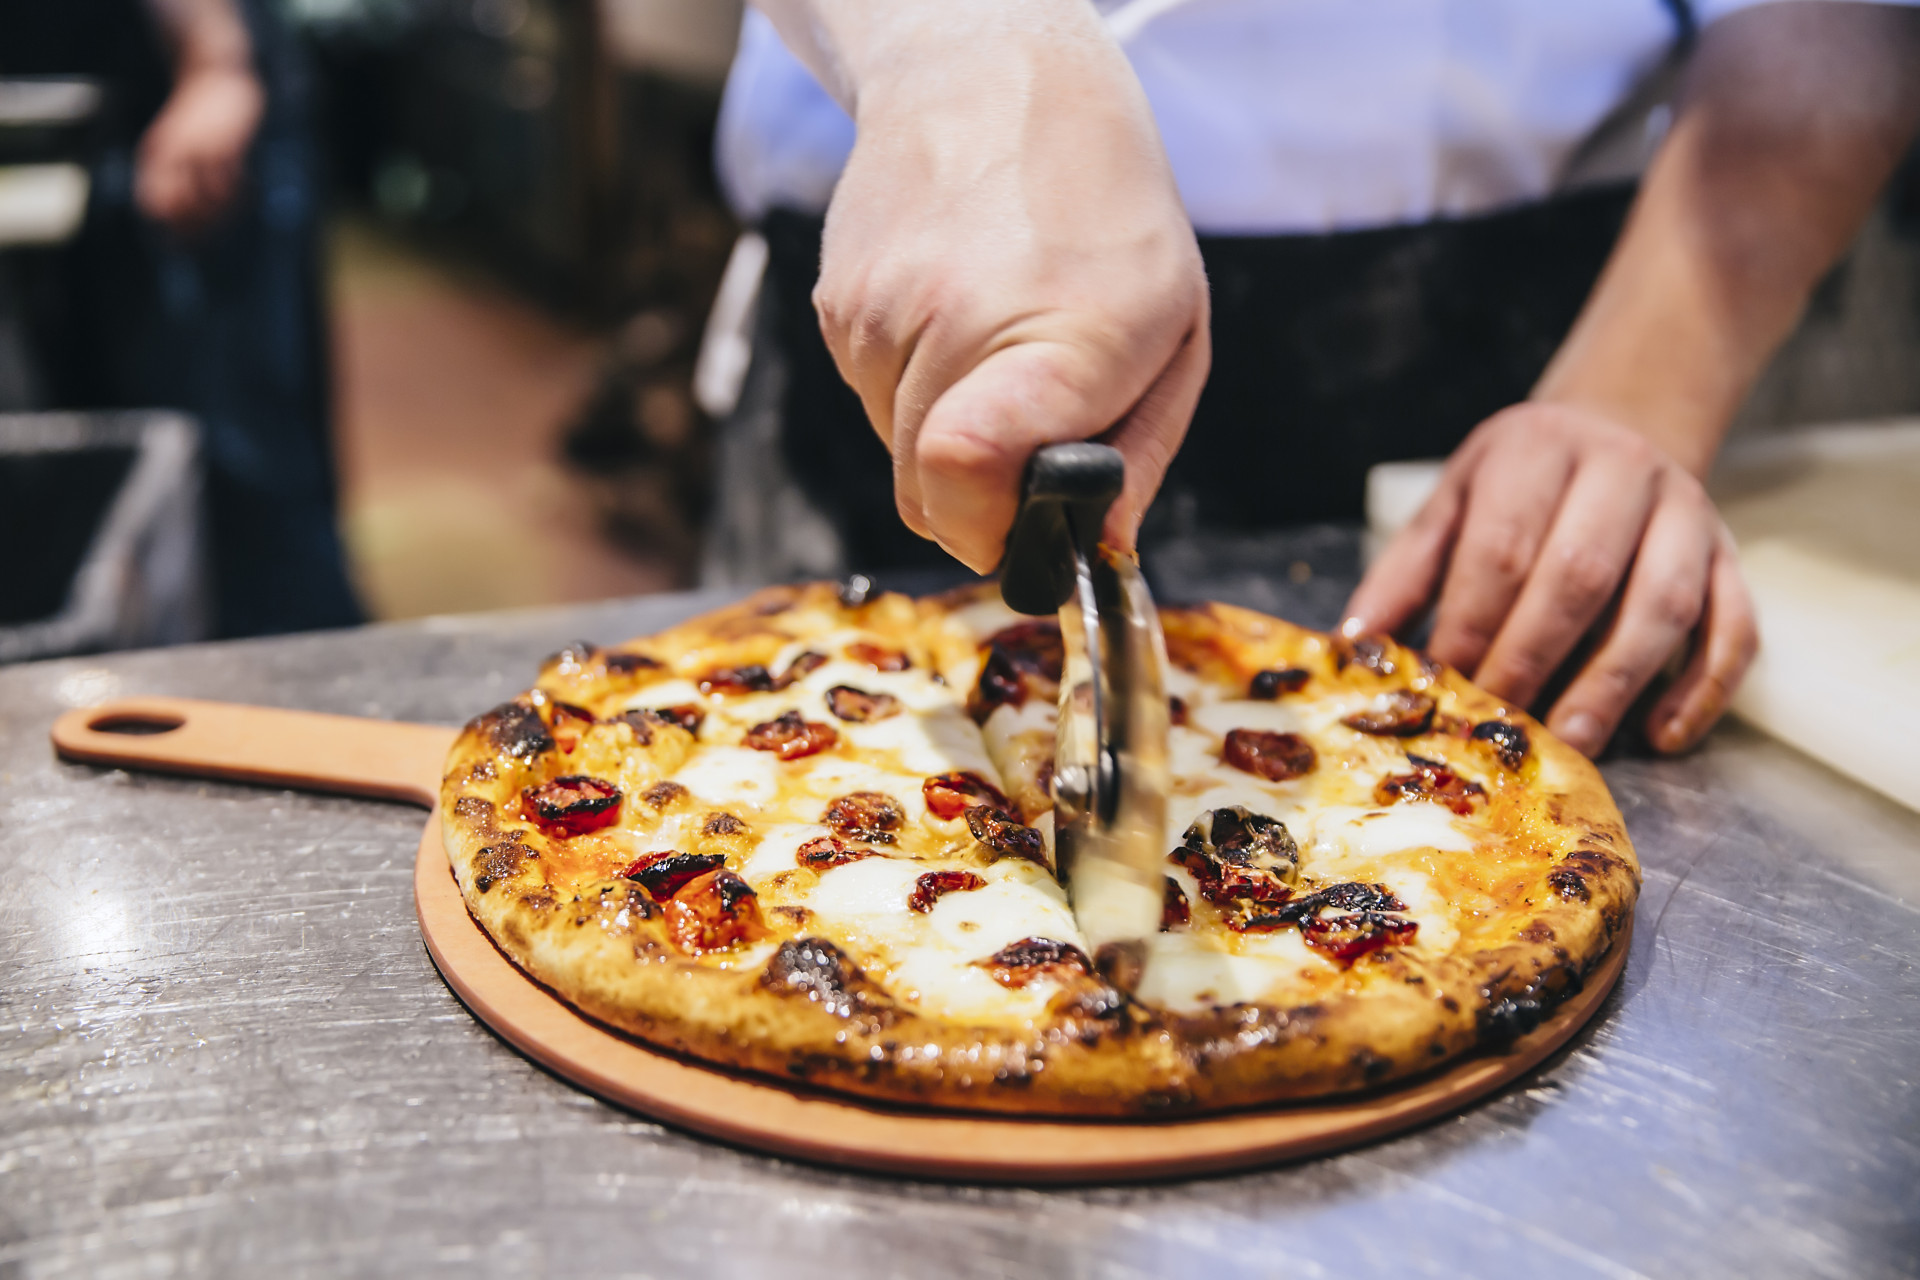 Pizza business profits can depend on the business model, location, and much more.